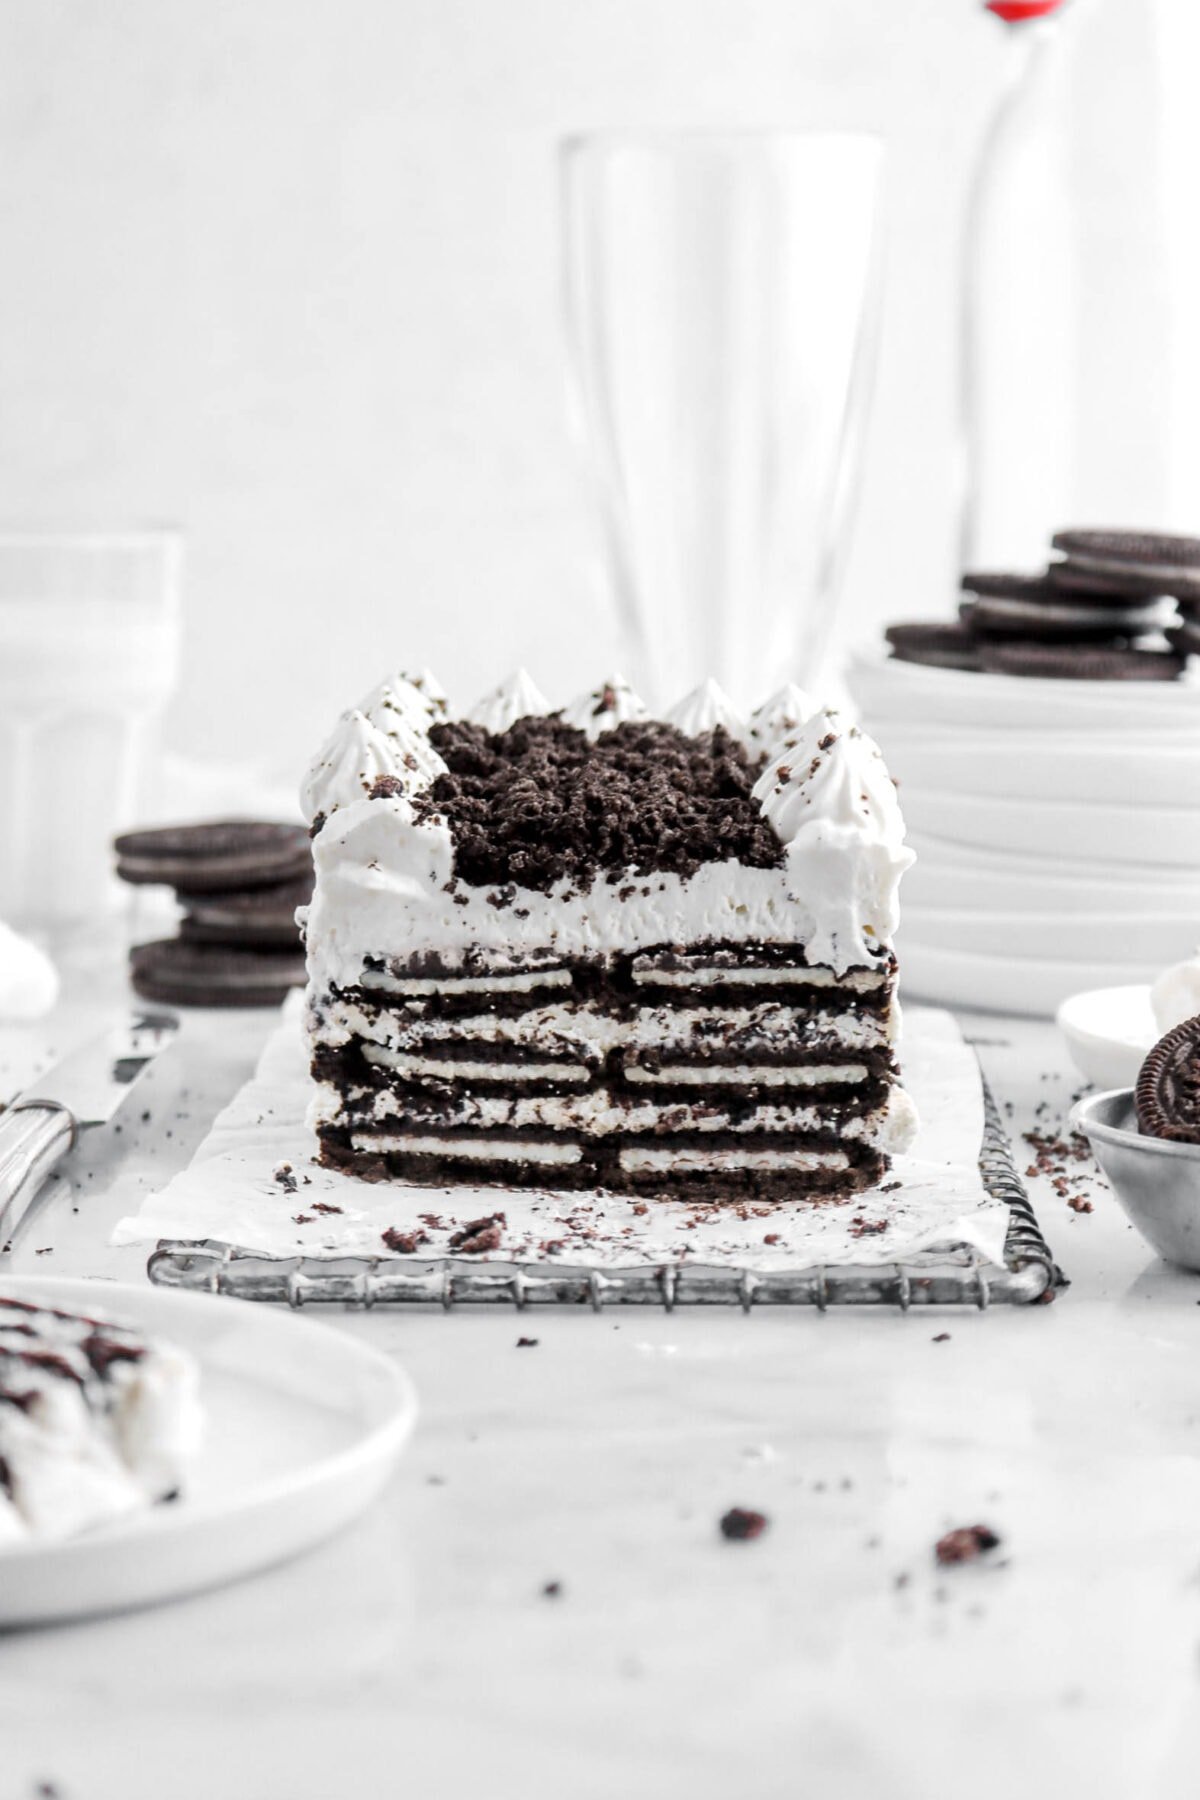 oreo icebox cake on wire tray with slice of cake on small white plate beside, with oreos around, a glass of milk behind, a stack of white plates, and two empty glasses.